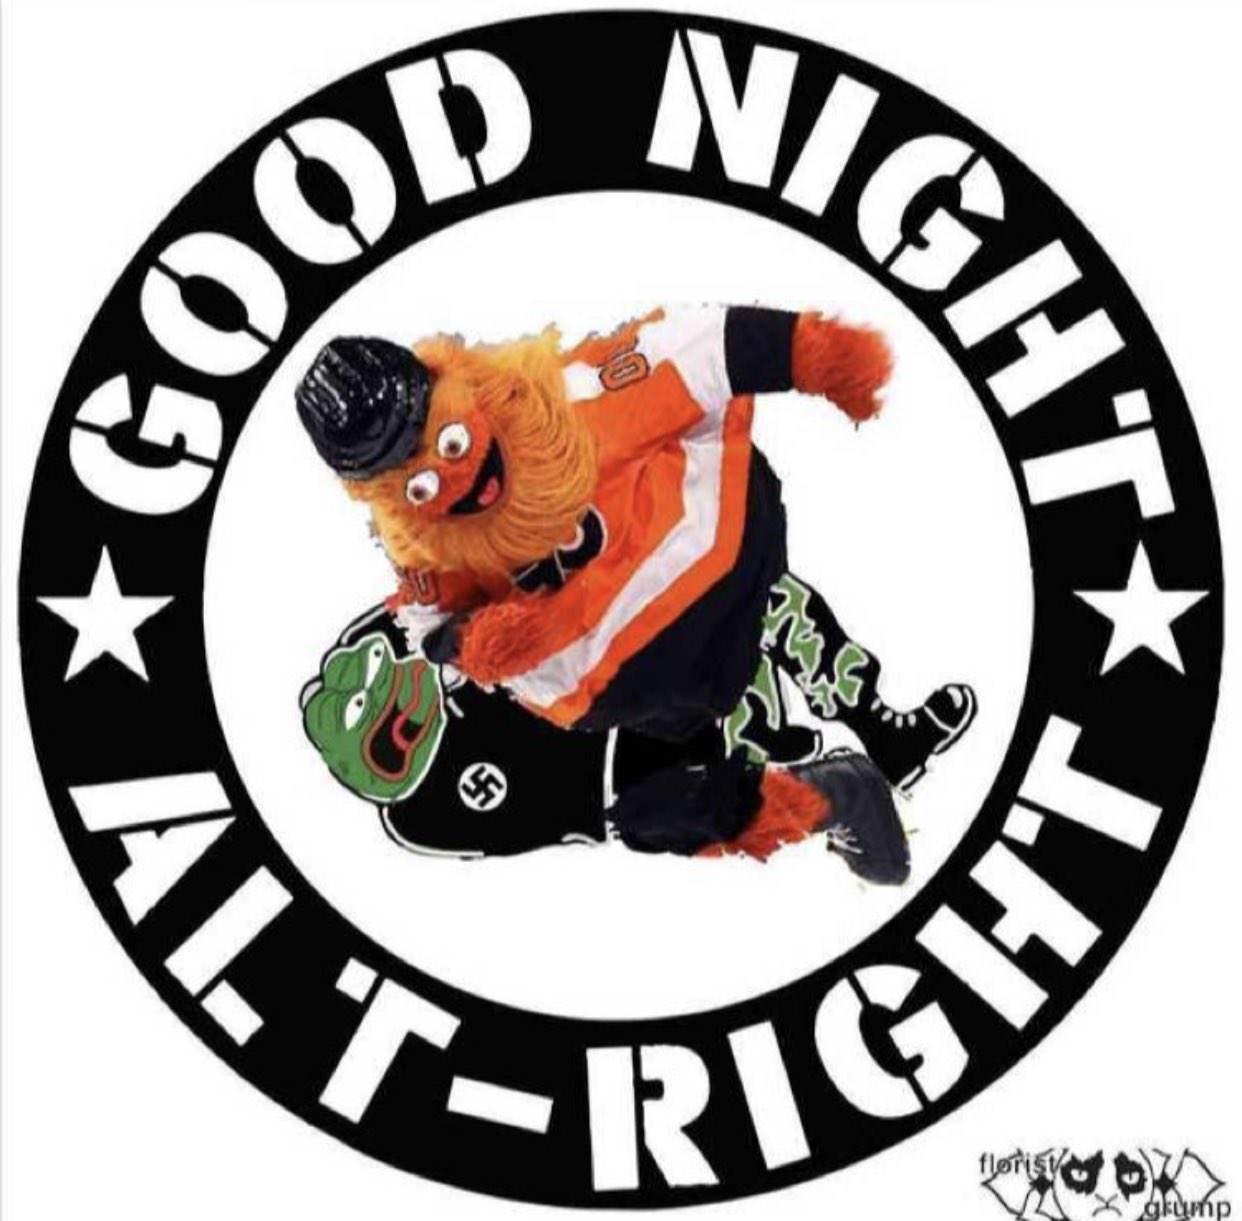 Gritty's Logo - This sub needs more Gritty!